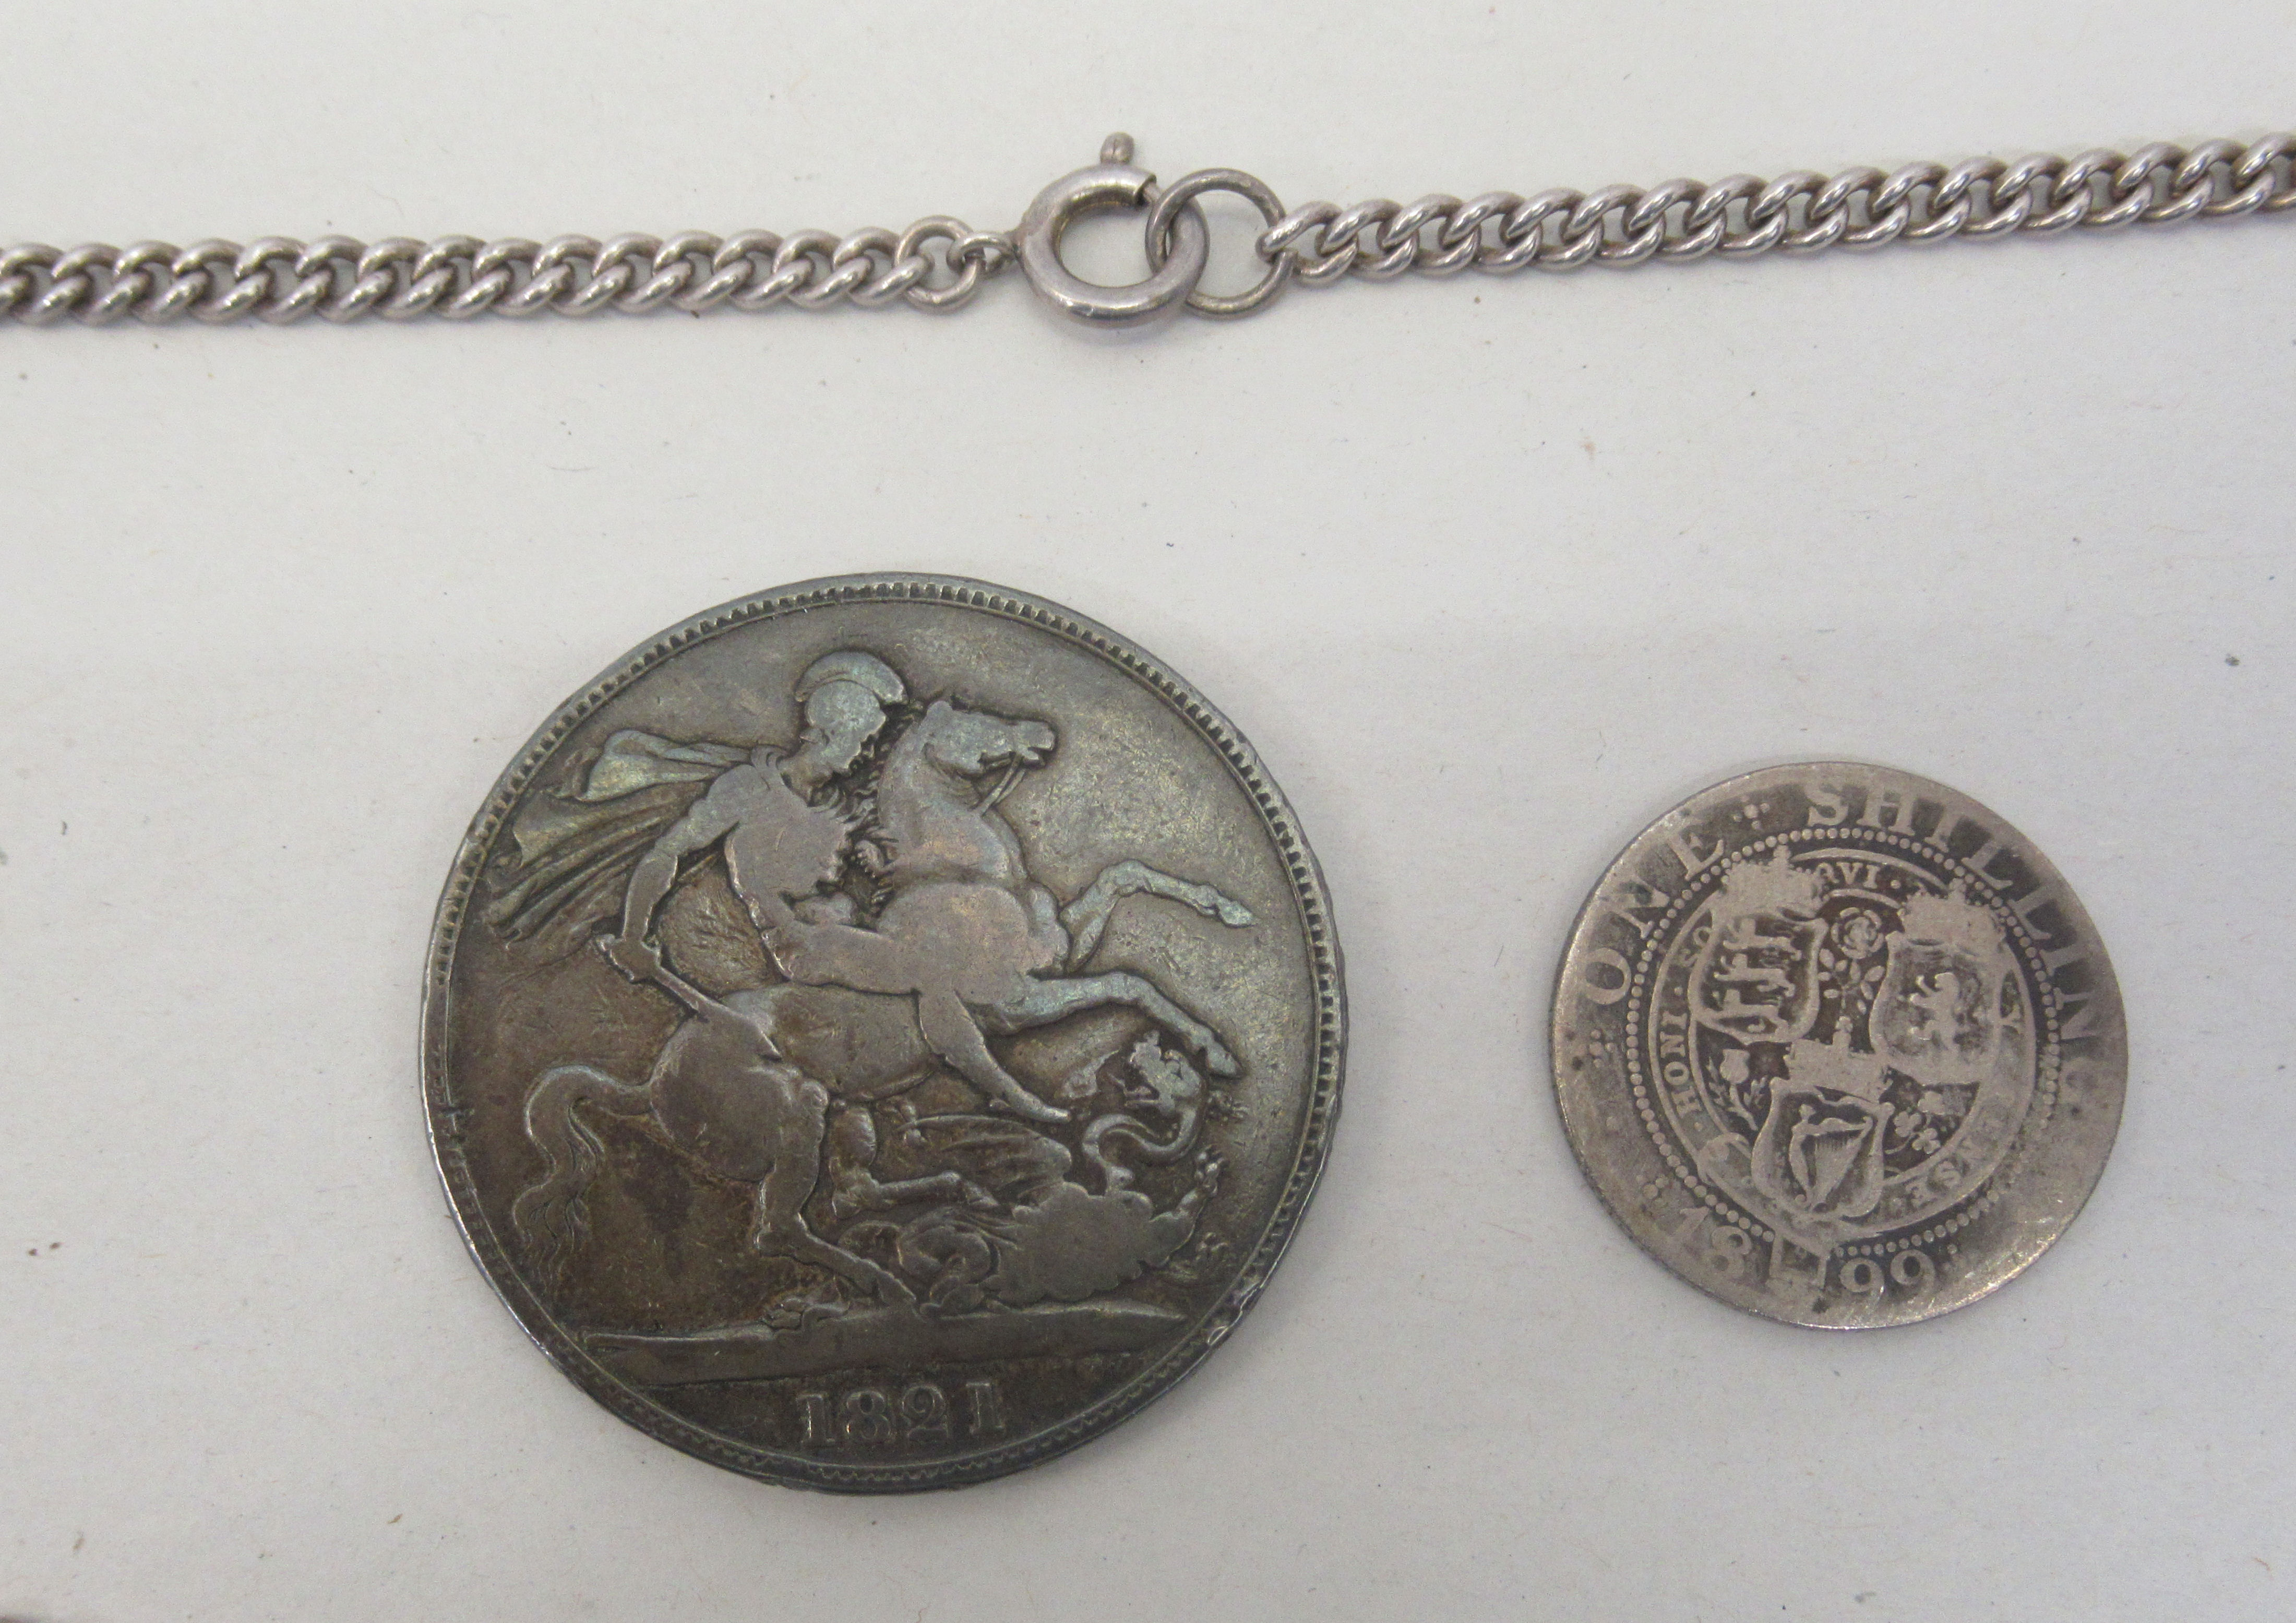 A George IV crown  1821; a Victorian crown  1891, in a silver mount, on a fine neckchain; and a - Image 2 of 5